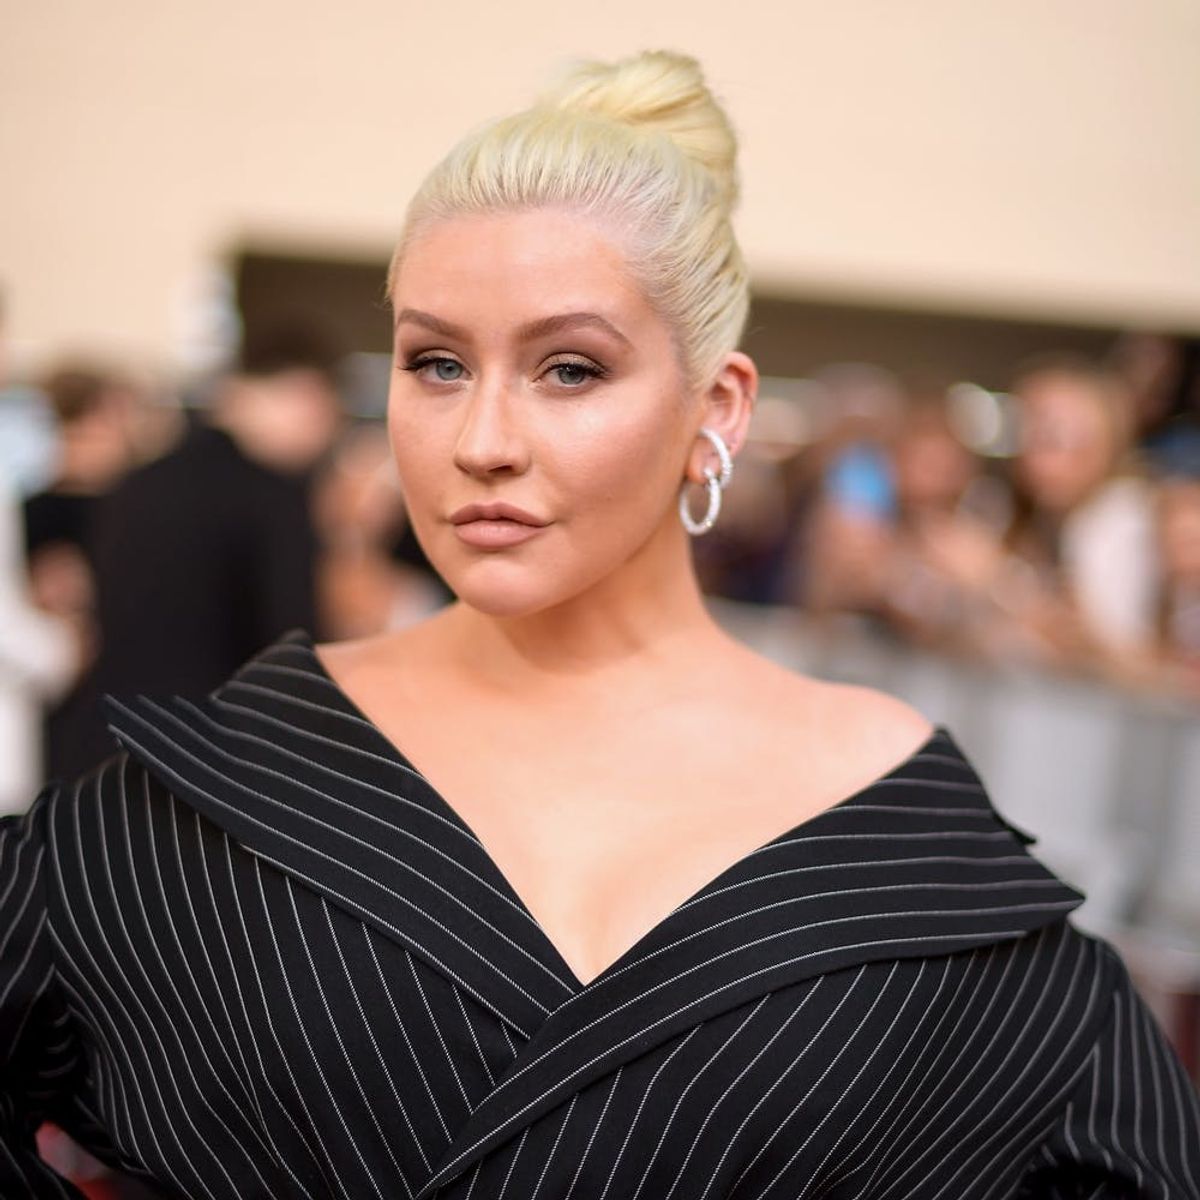 Christina Aguilera Recalls Feeling Hurt by the Controversy Over Her ‘Stripped’ Makeover